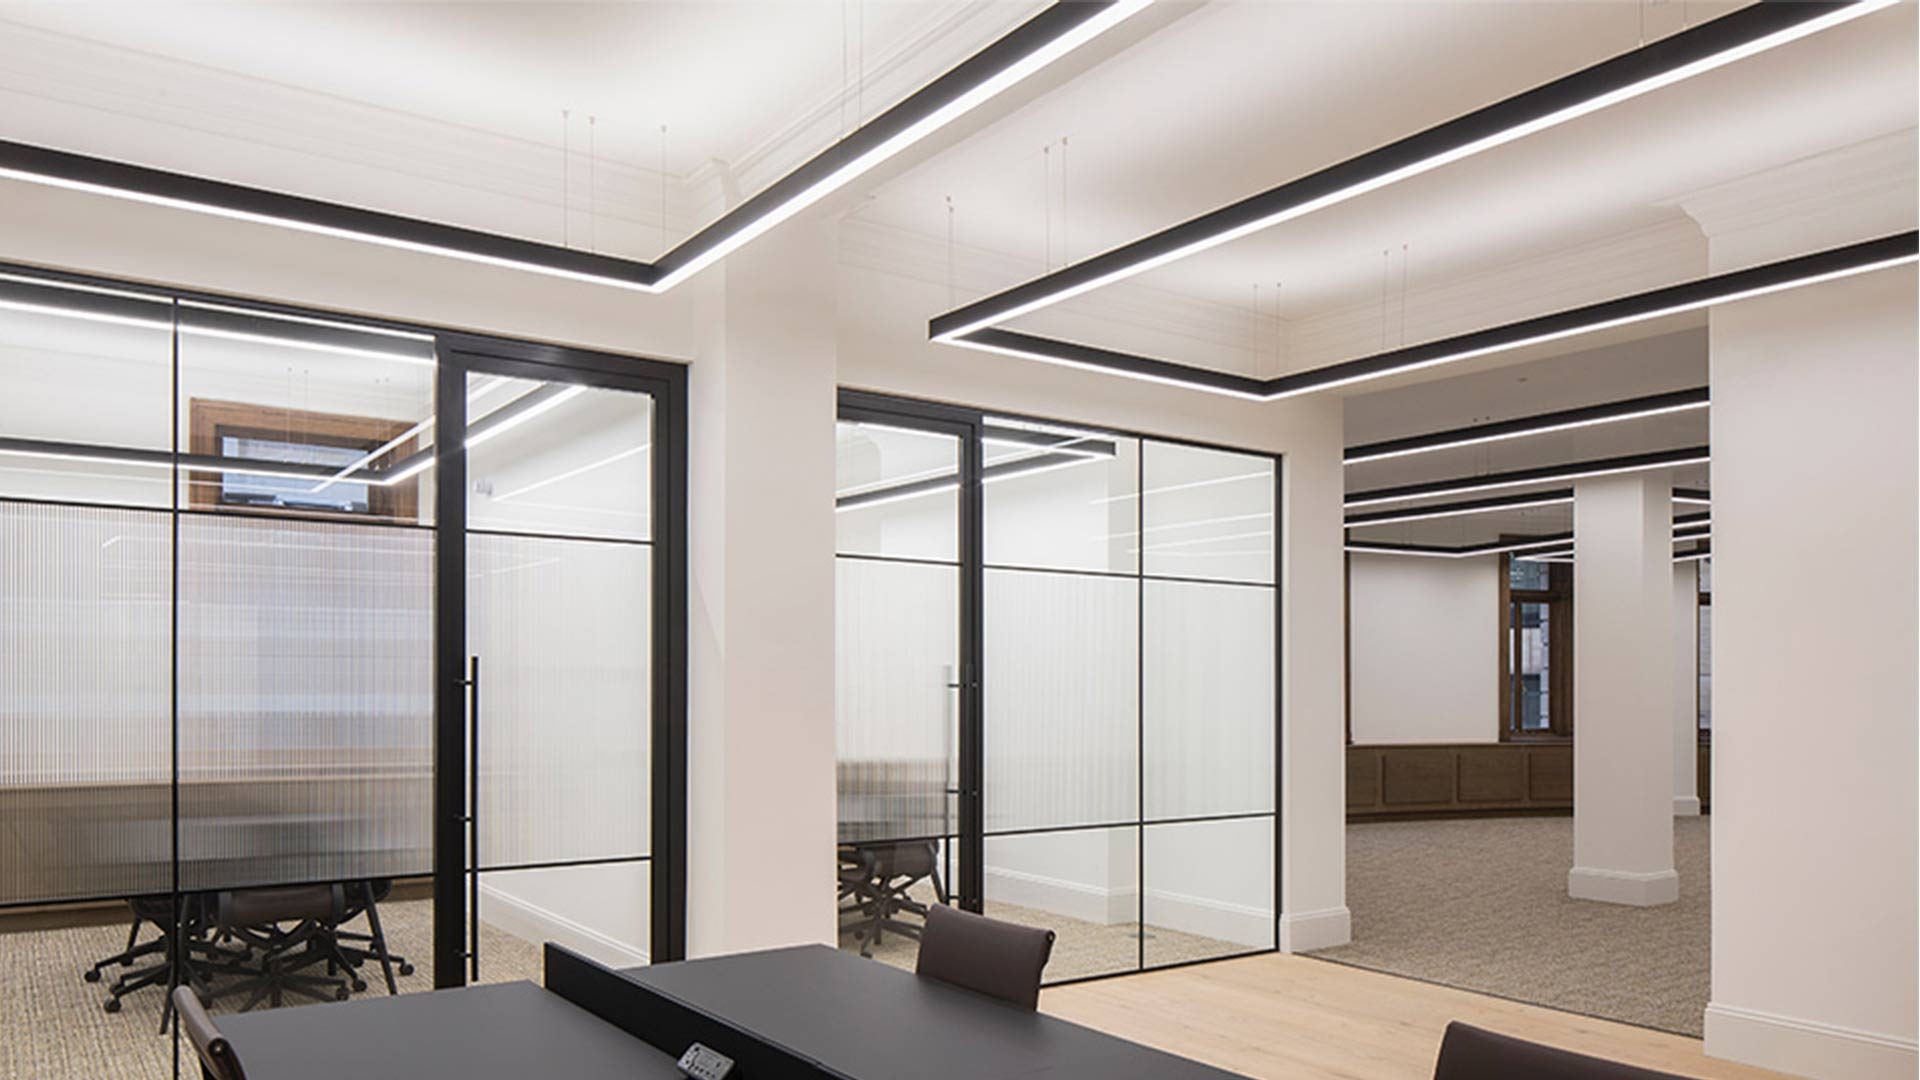 London Wall Office Space Frames Limes Light Illuminating Desk Workspace Interior Lighting Designers Nulty